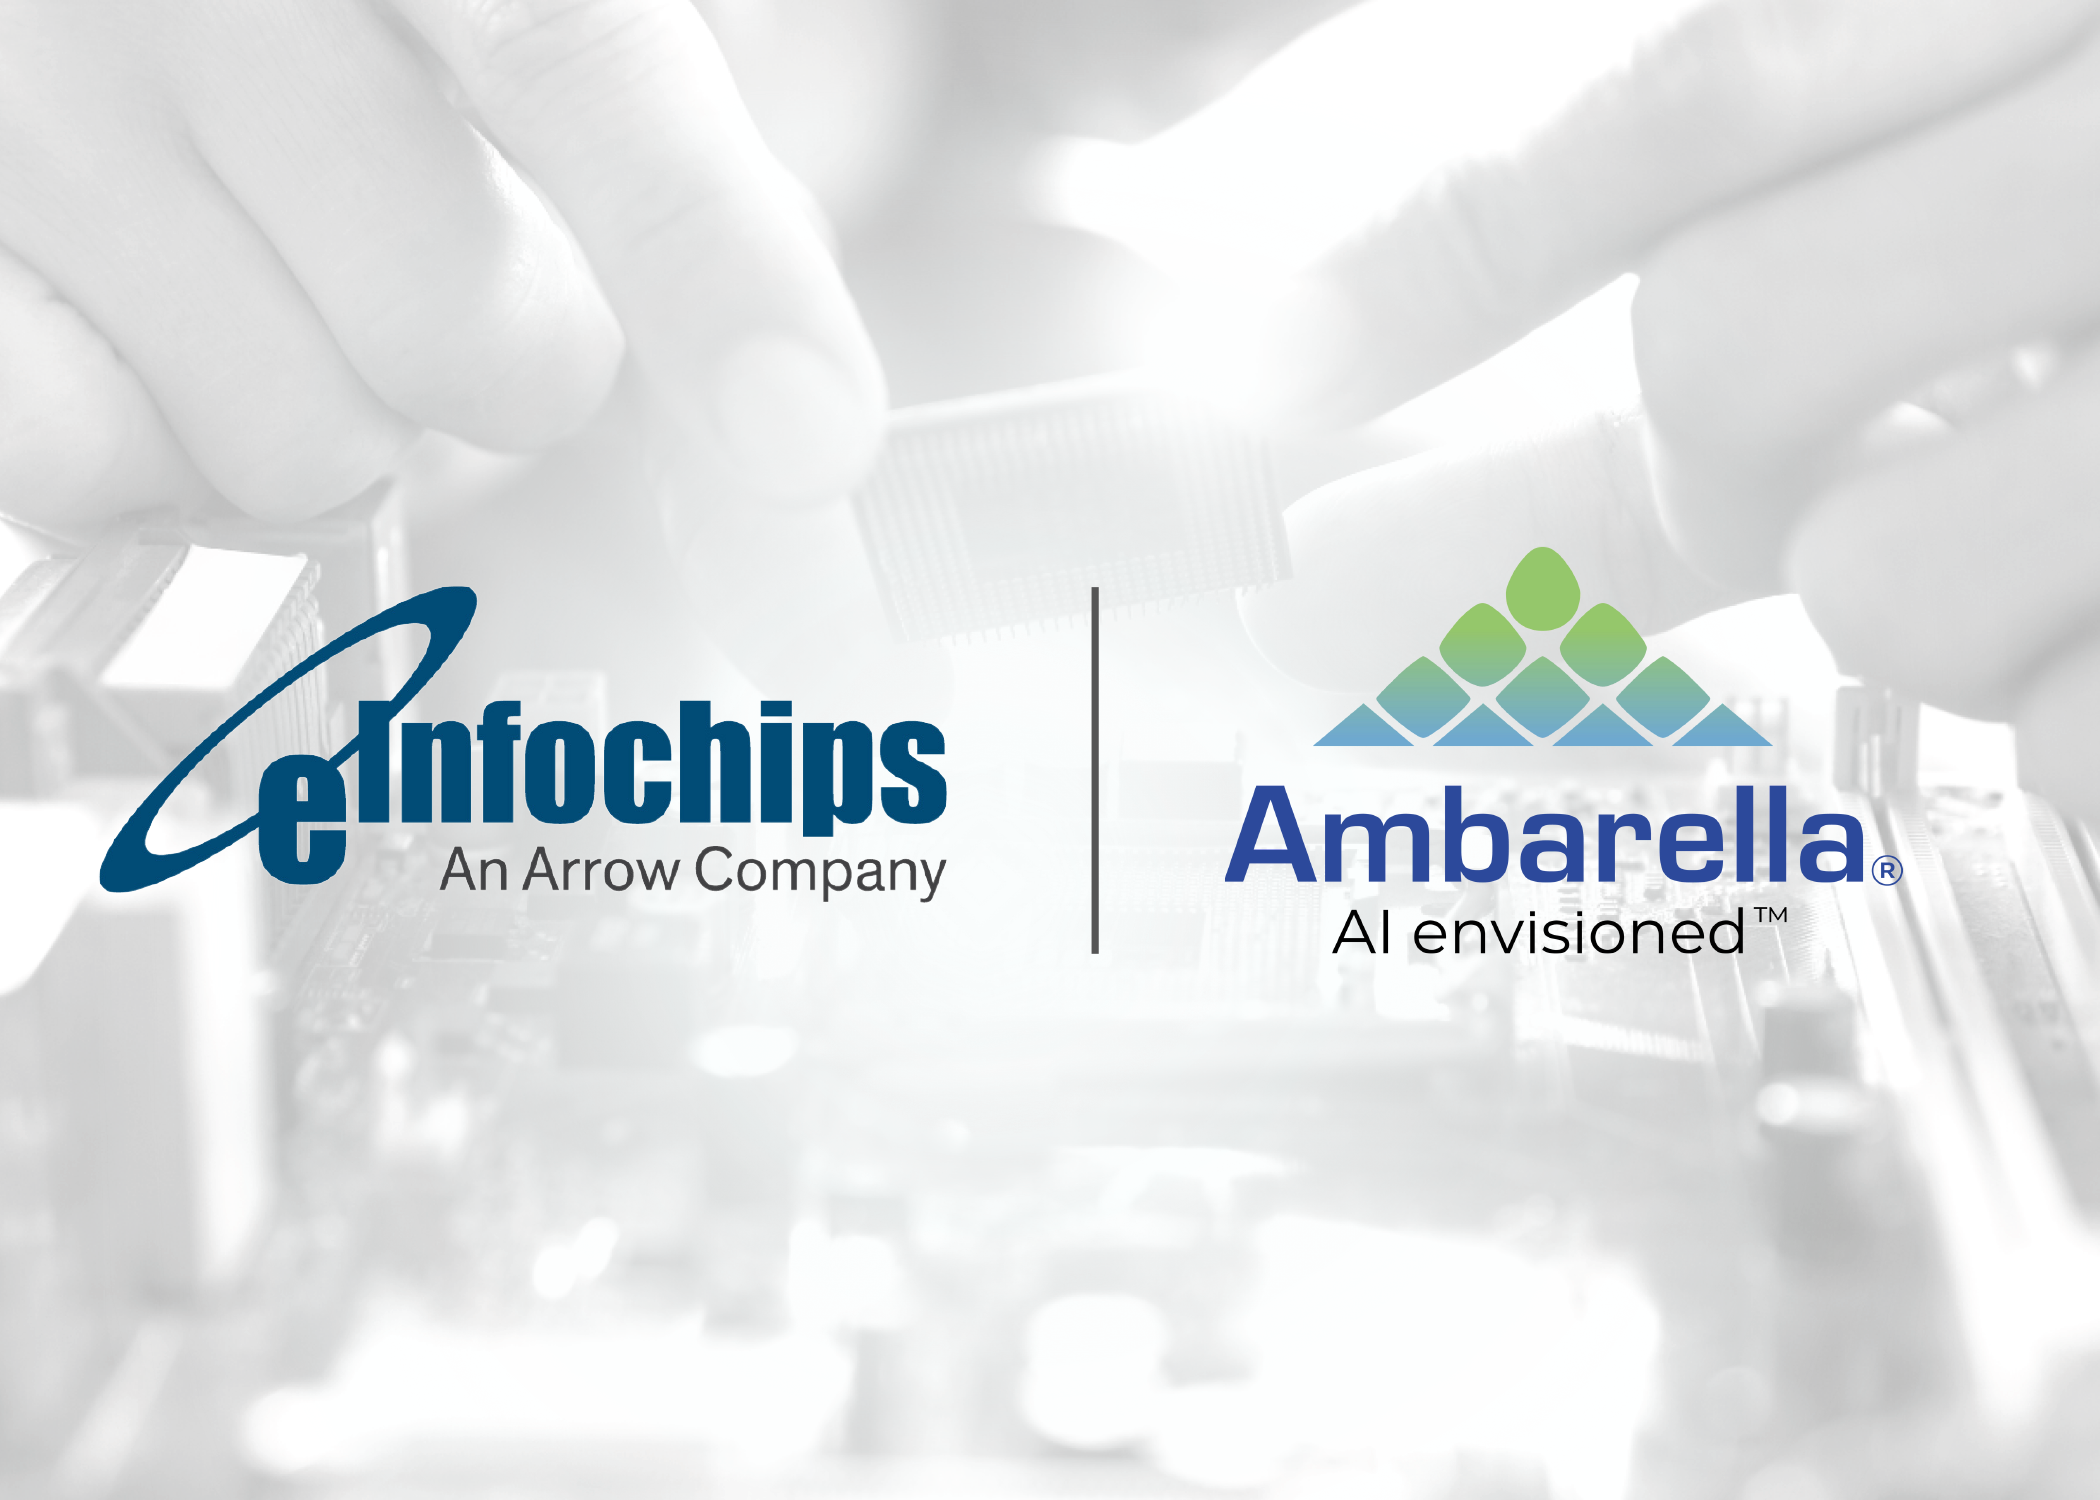 Ambarella and eInfochips team up on Edge AI Vision Design Services